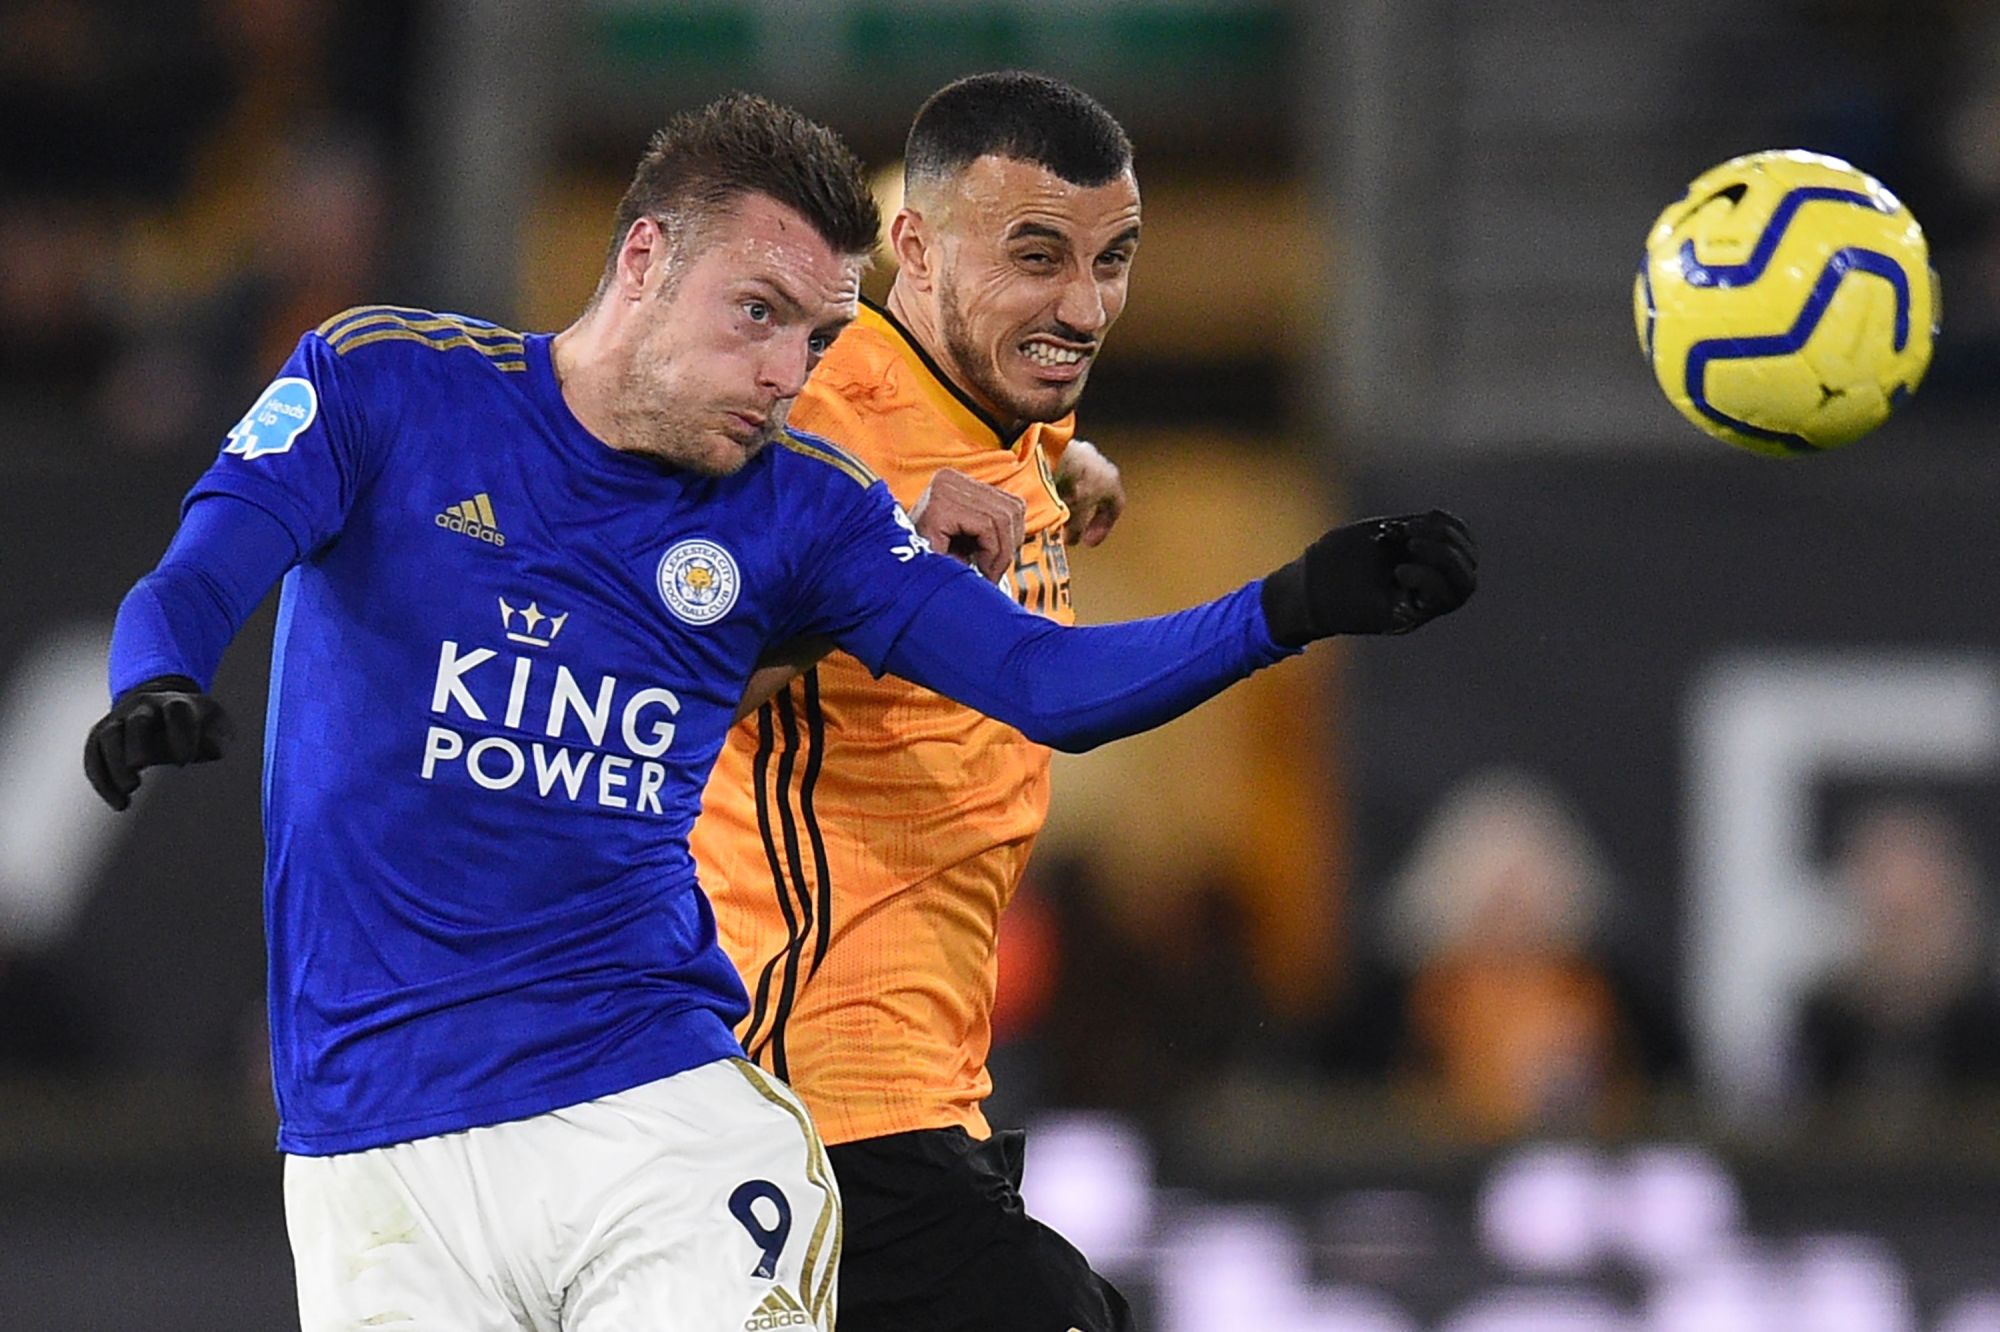 Wolves held at home by Foxes in scoreless draw after VAR rules out goal